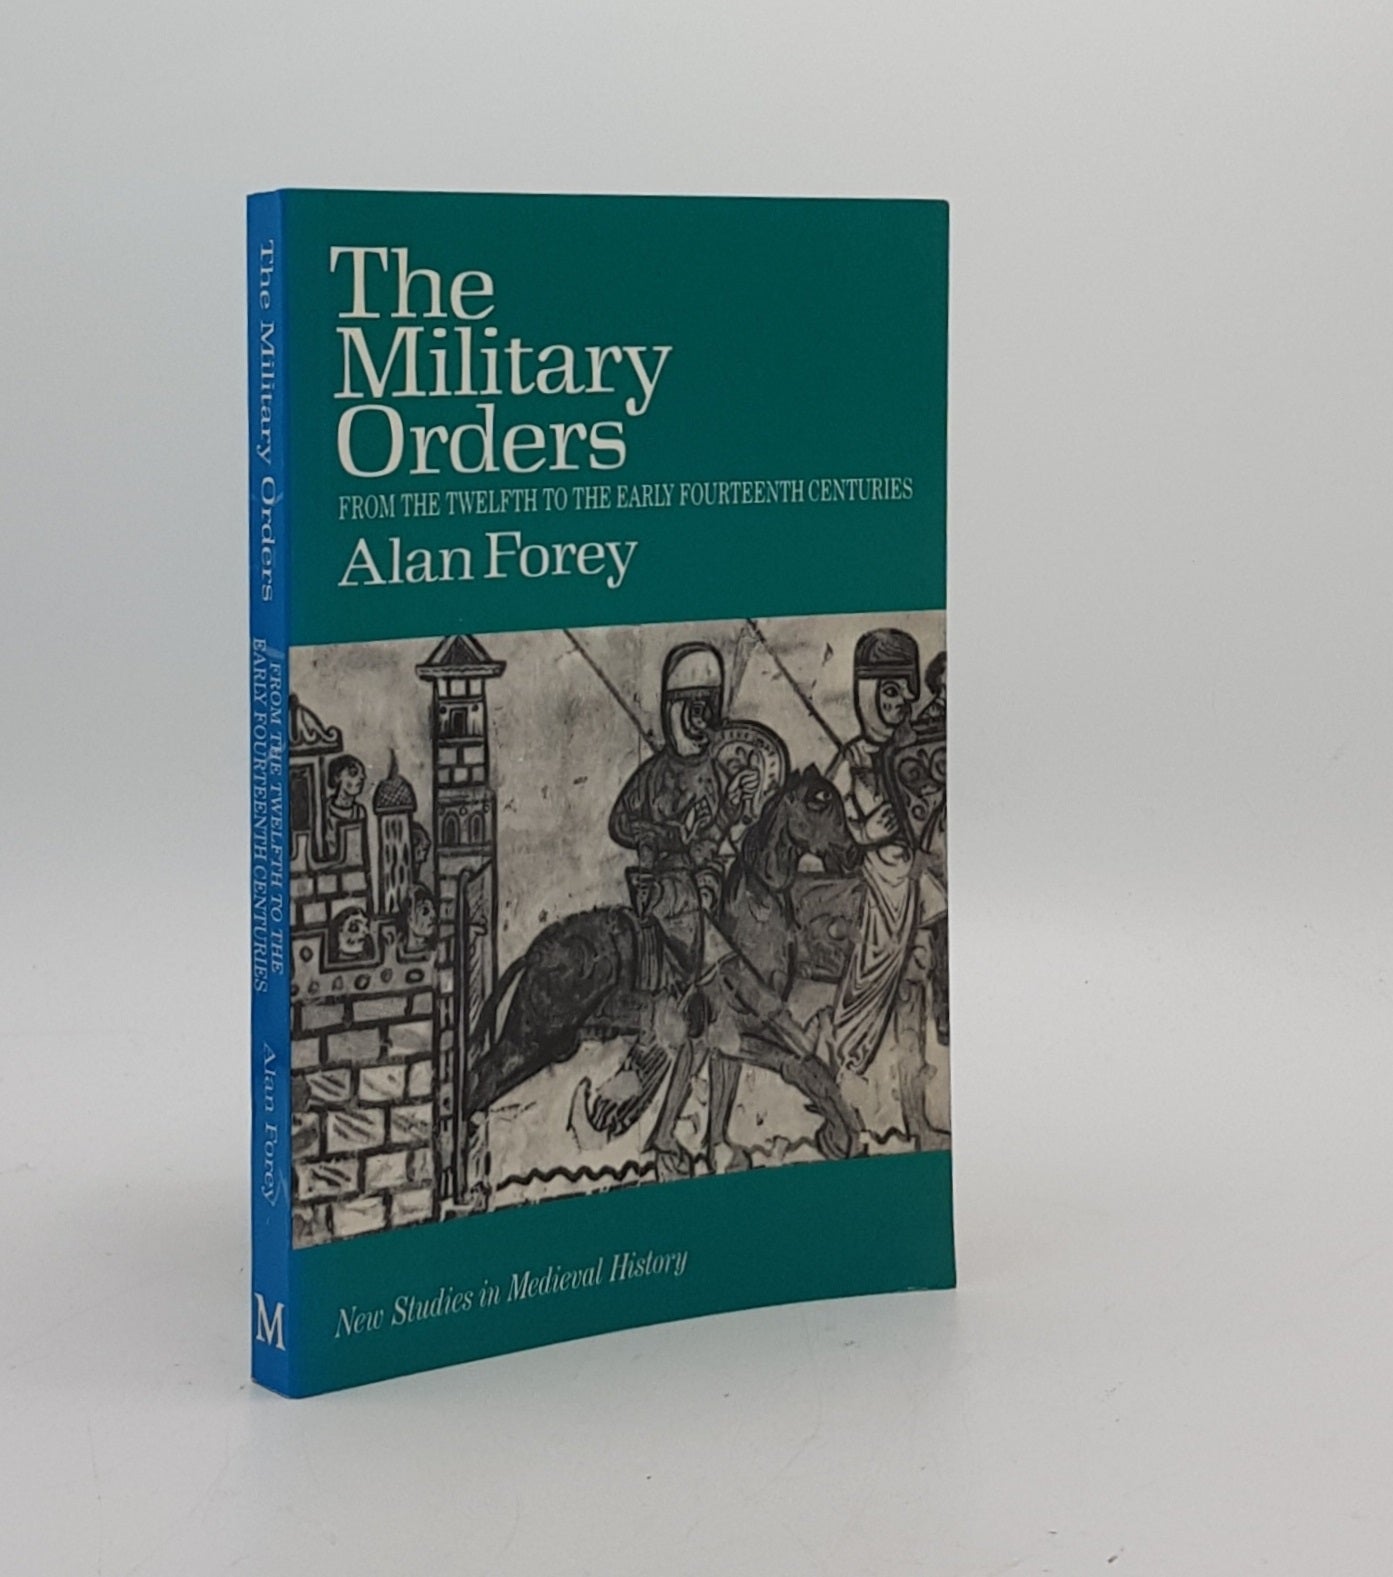 FOREY Alan - The Military Orders from the Twelfth to the Early Fourteenth Centuries